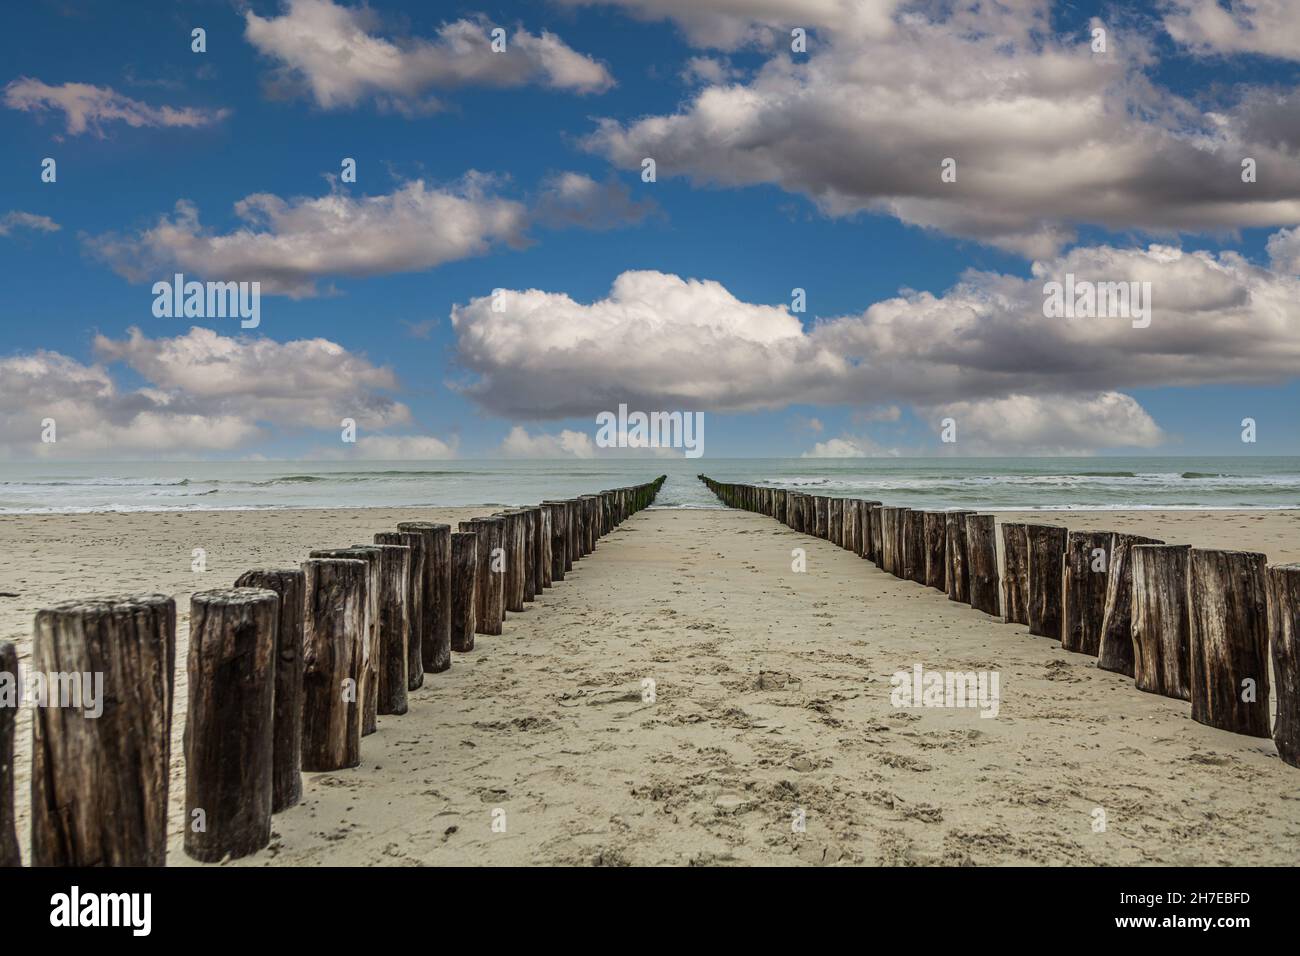 Sandy beach at Burgh-Haamstede in Dutch province of Zeeland with a double row of posts of beach in the sea intended as functional coastal protection Stock Photo